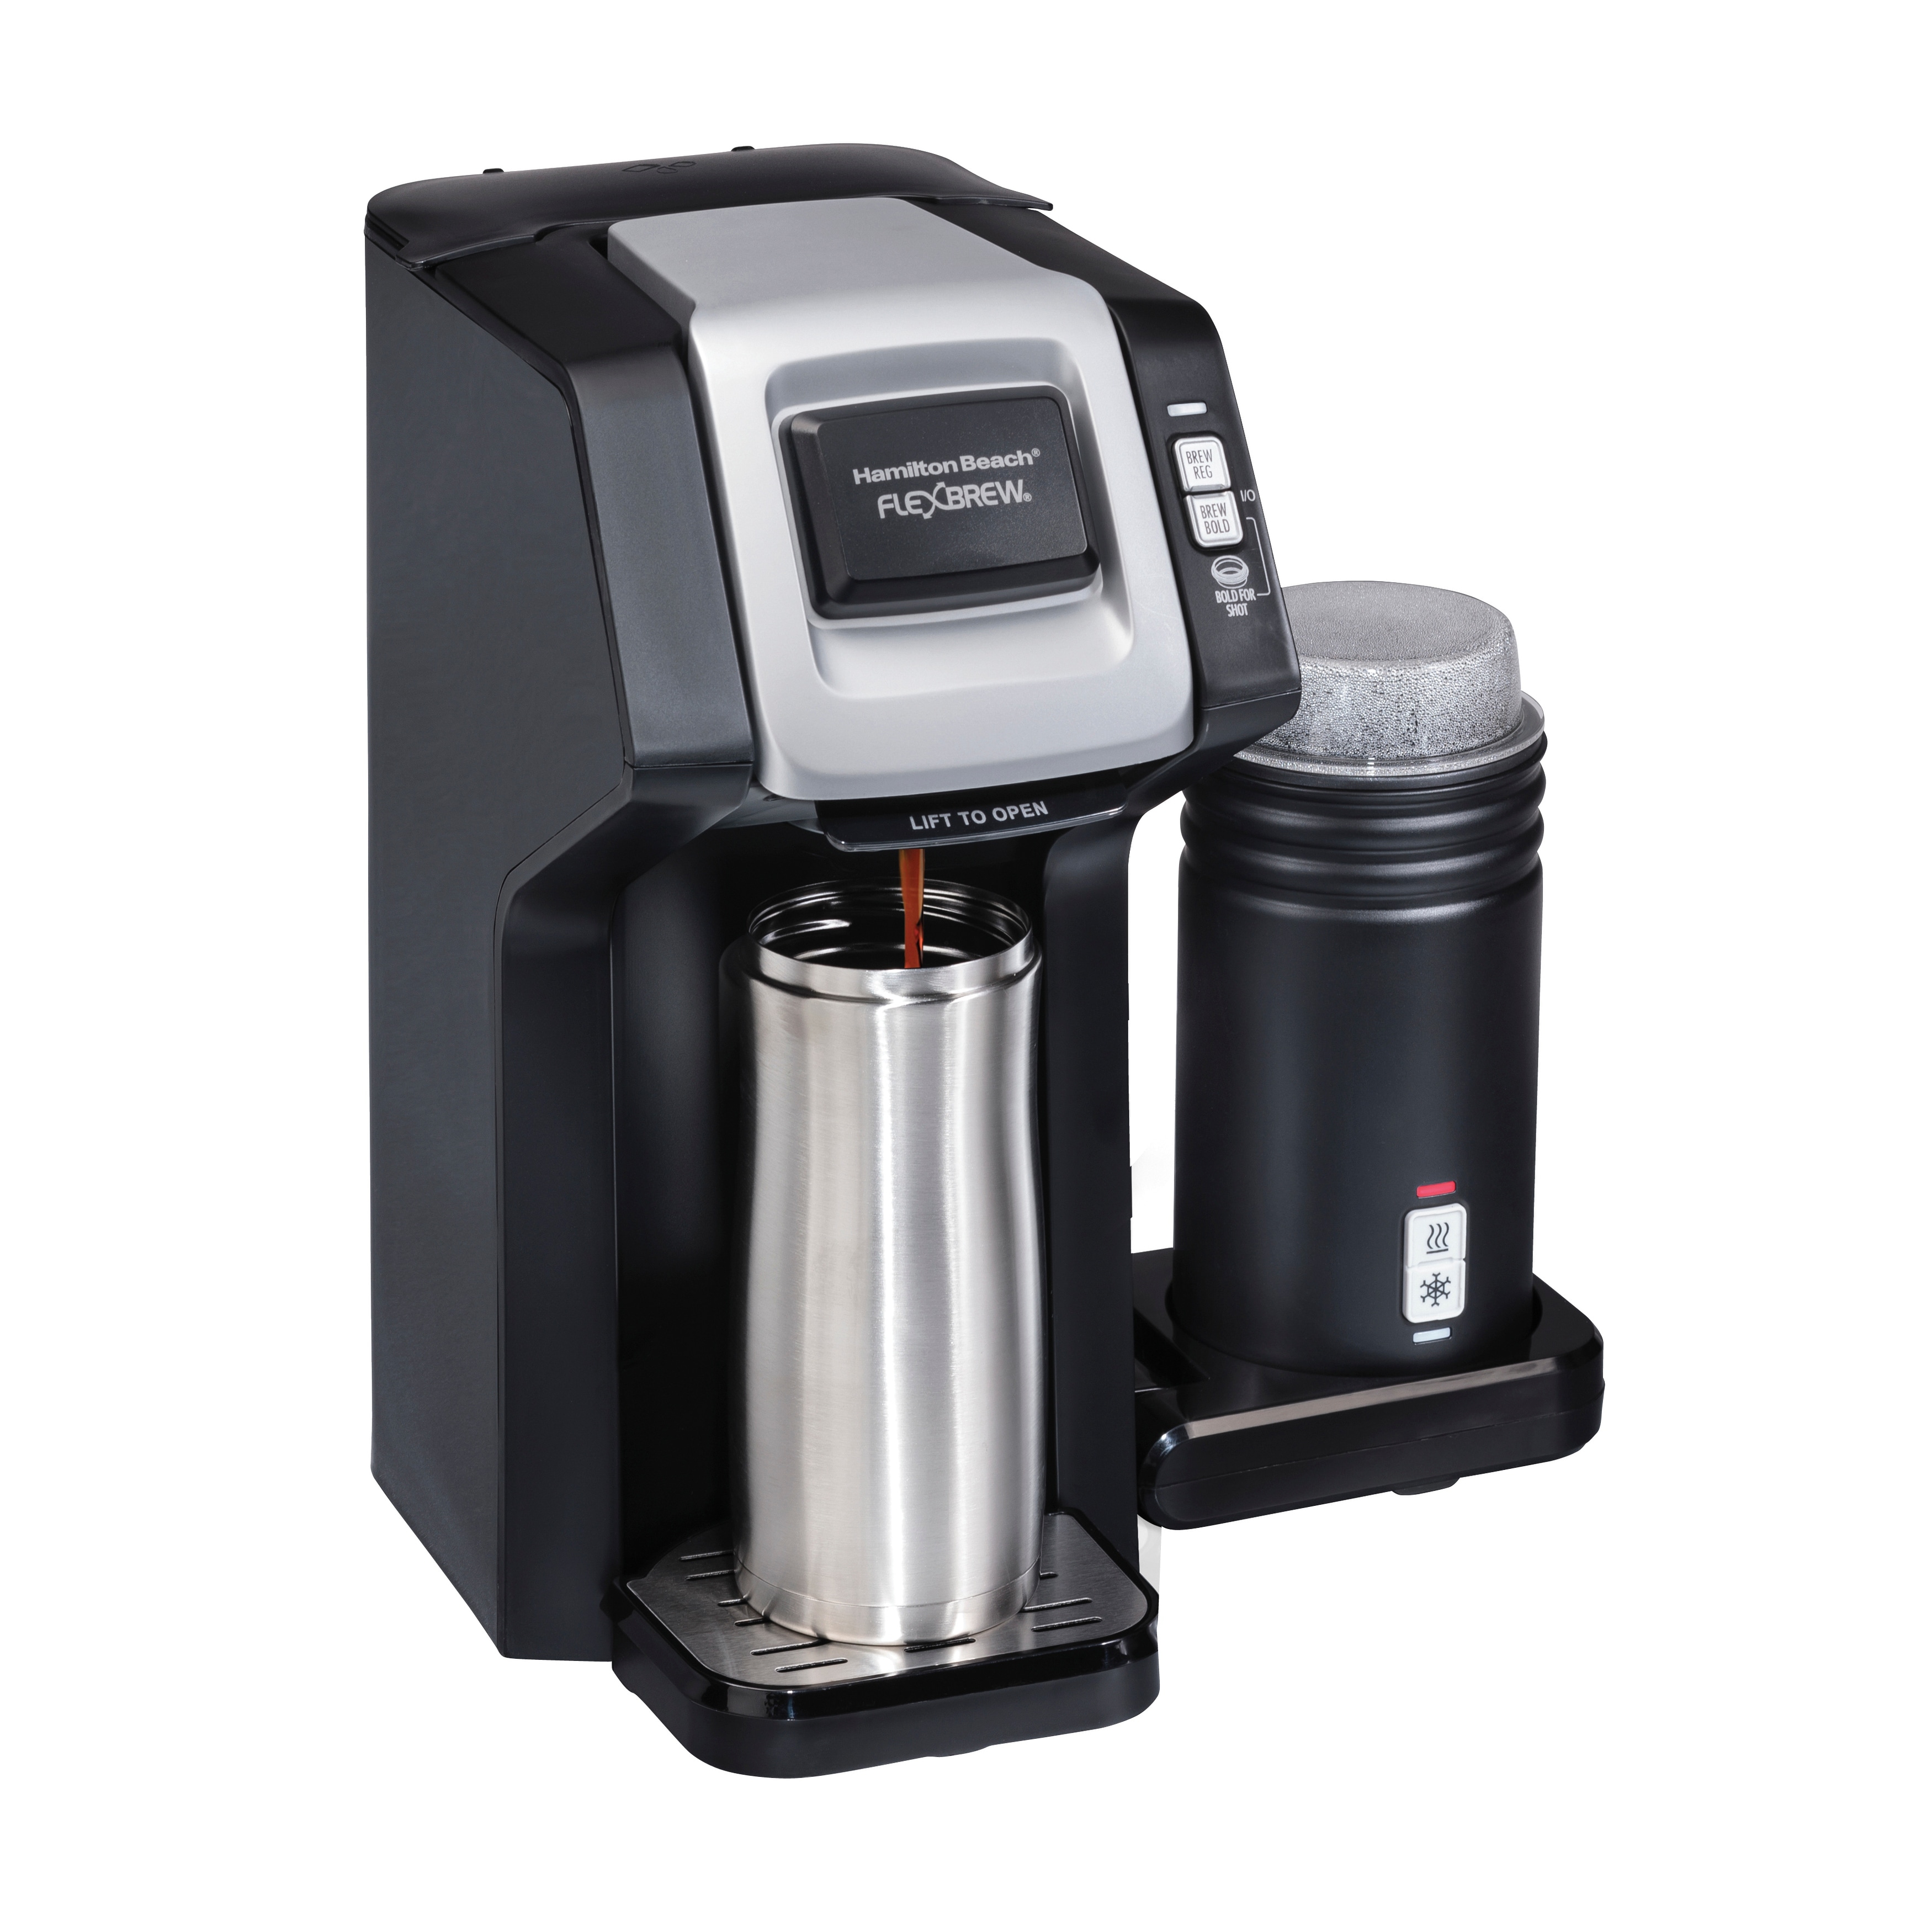 https://ak1.ostkcdn.com/images/products/is/images/direct/6a3dd78b8209af56e76e7aab3c00a1df67fcbf29/Hamilton-Beach-FlexBrew-Dual-Coffee-Maker-with-Milk-Frother.jpg